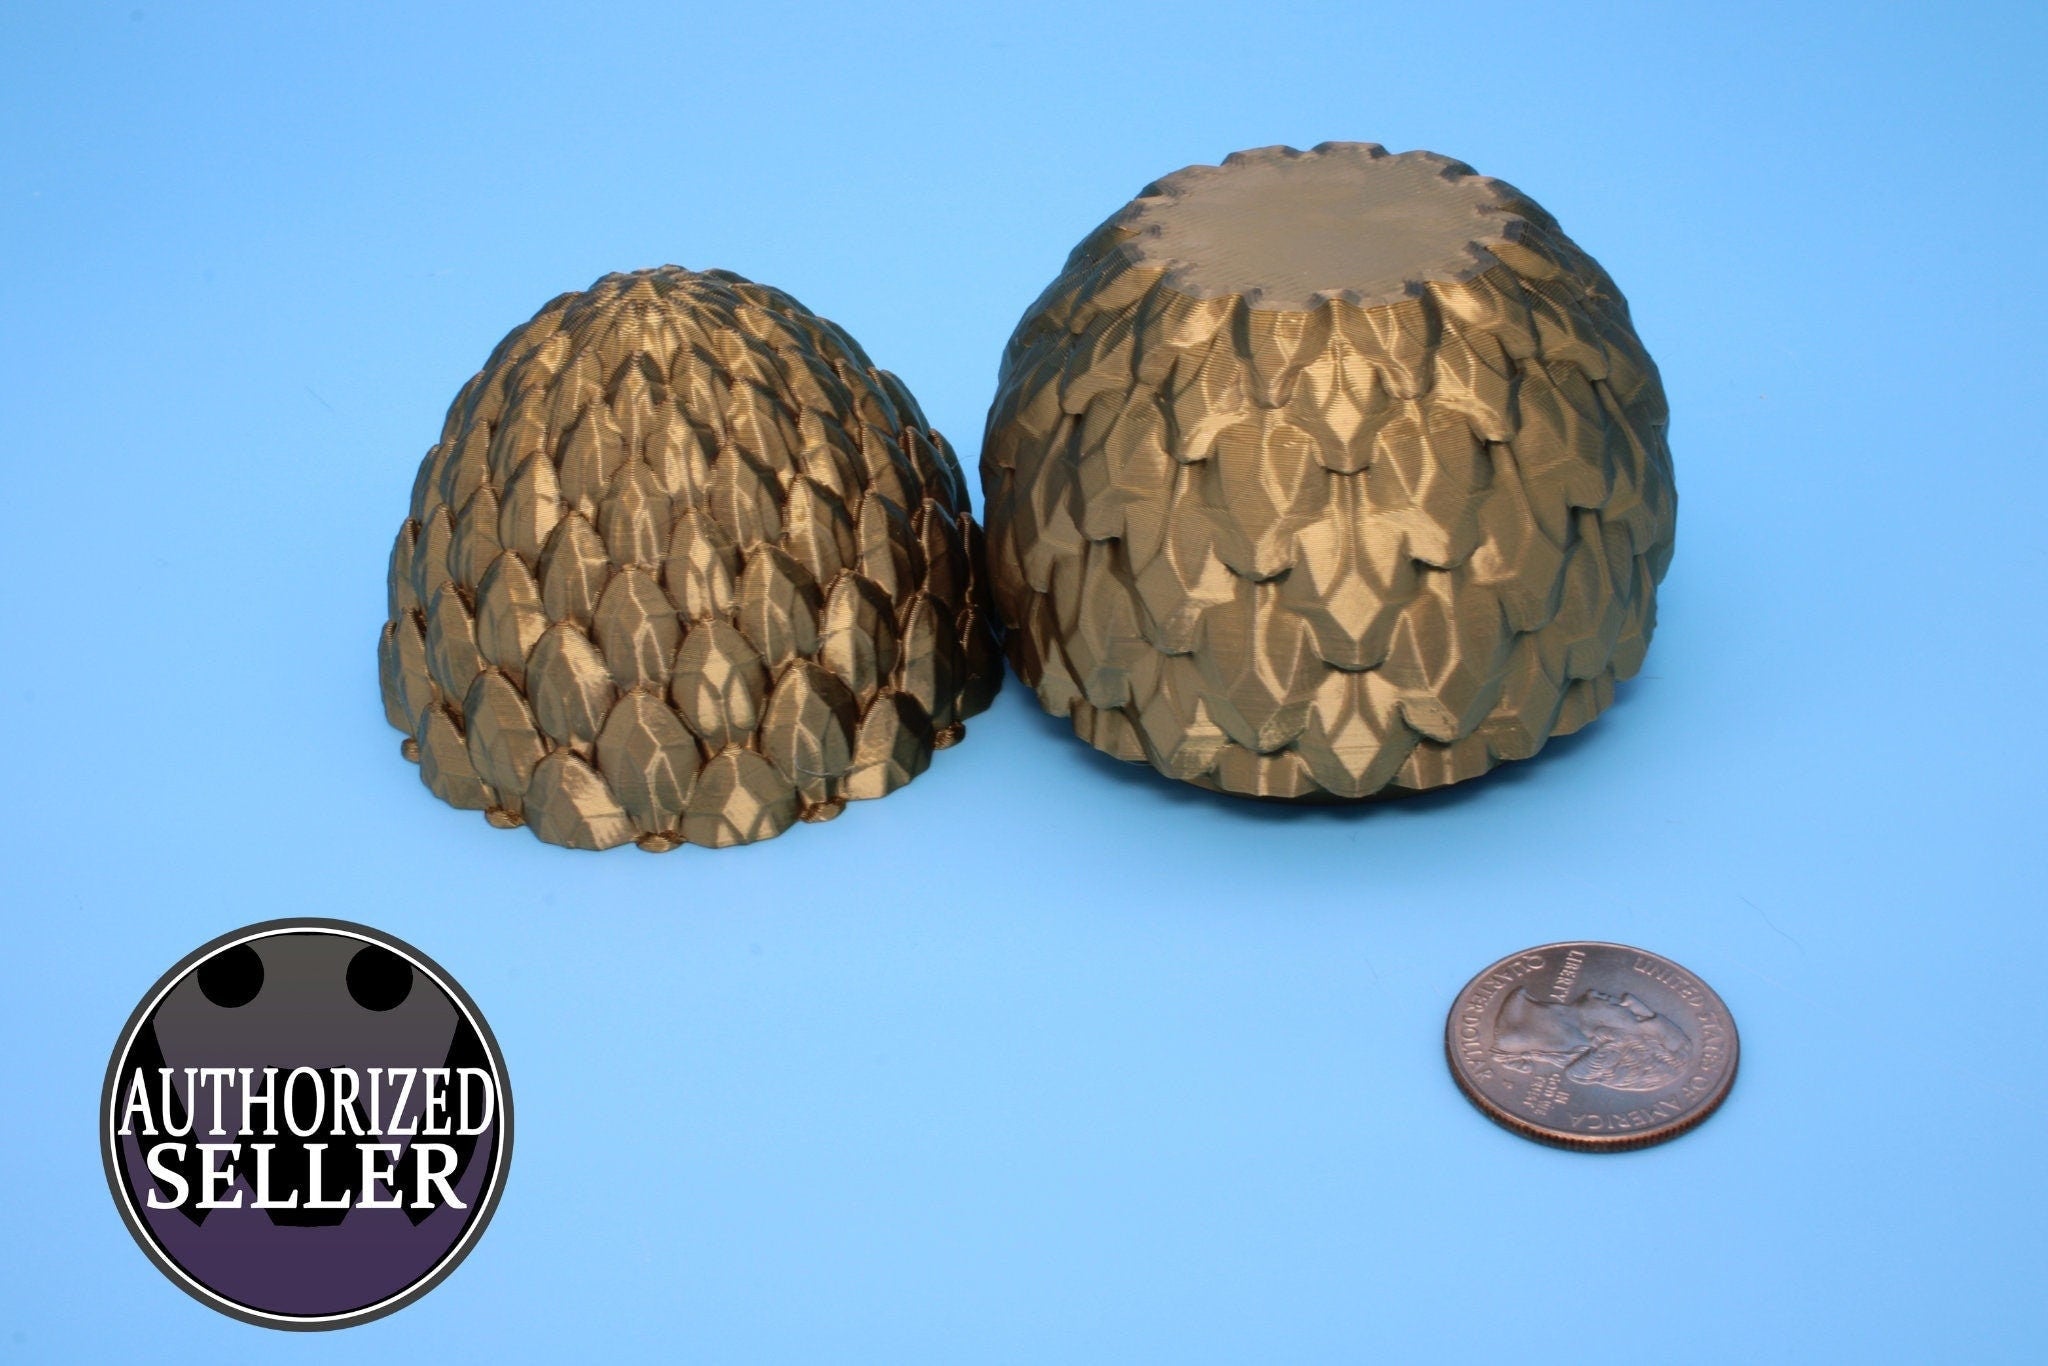 Small Dragon Scale Egg | 3D printed Dragon Egg Storage! | 3.5 in. Crystal Egg | Gift. Decorative Egg